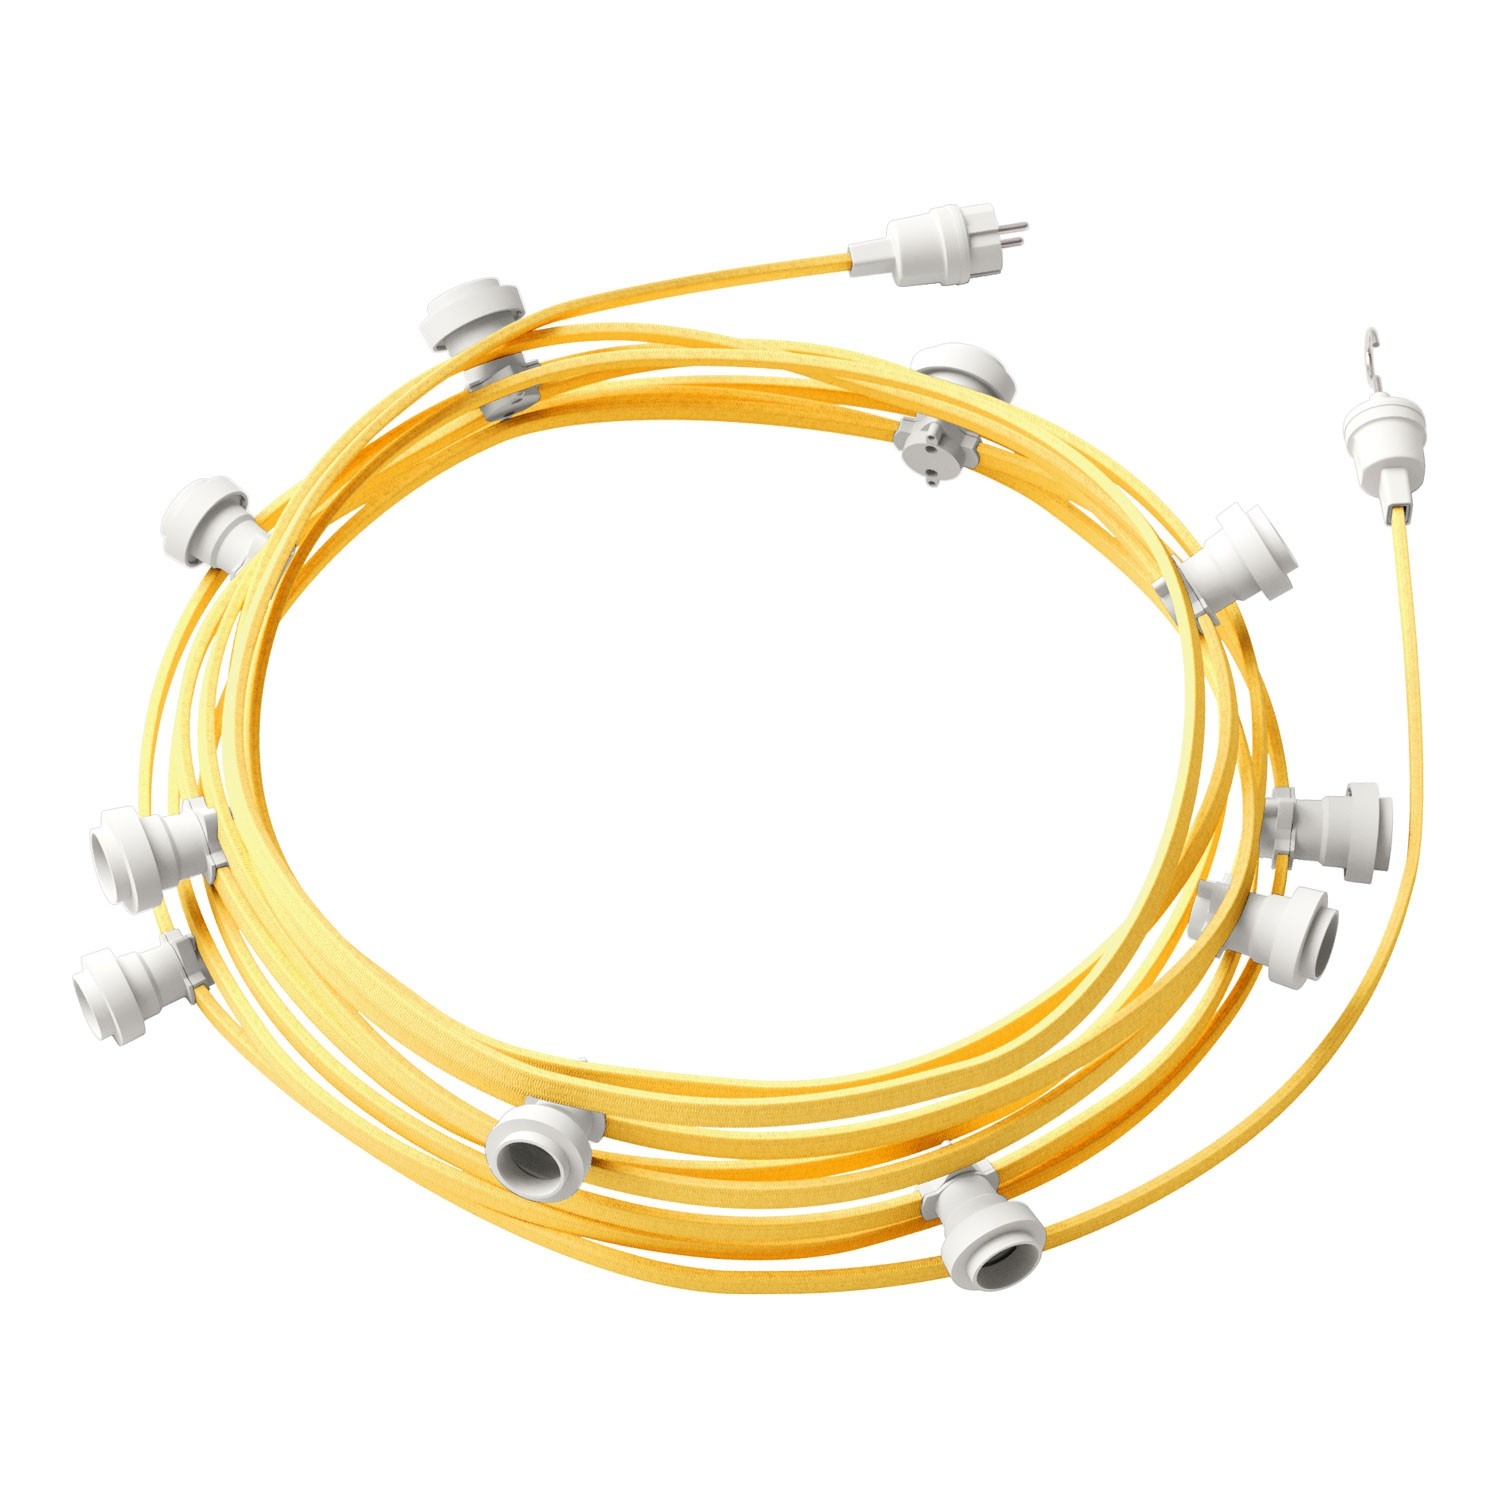 Ready-to-use 40ft String Light with 5 white Sockets, Hook and Plug